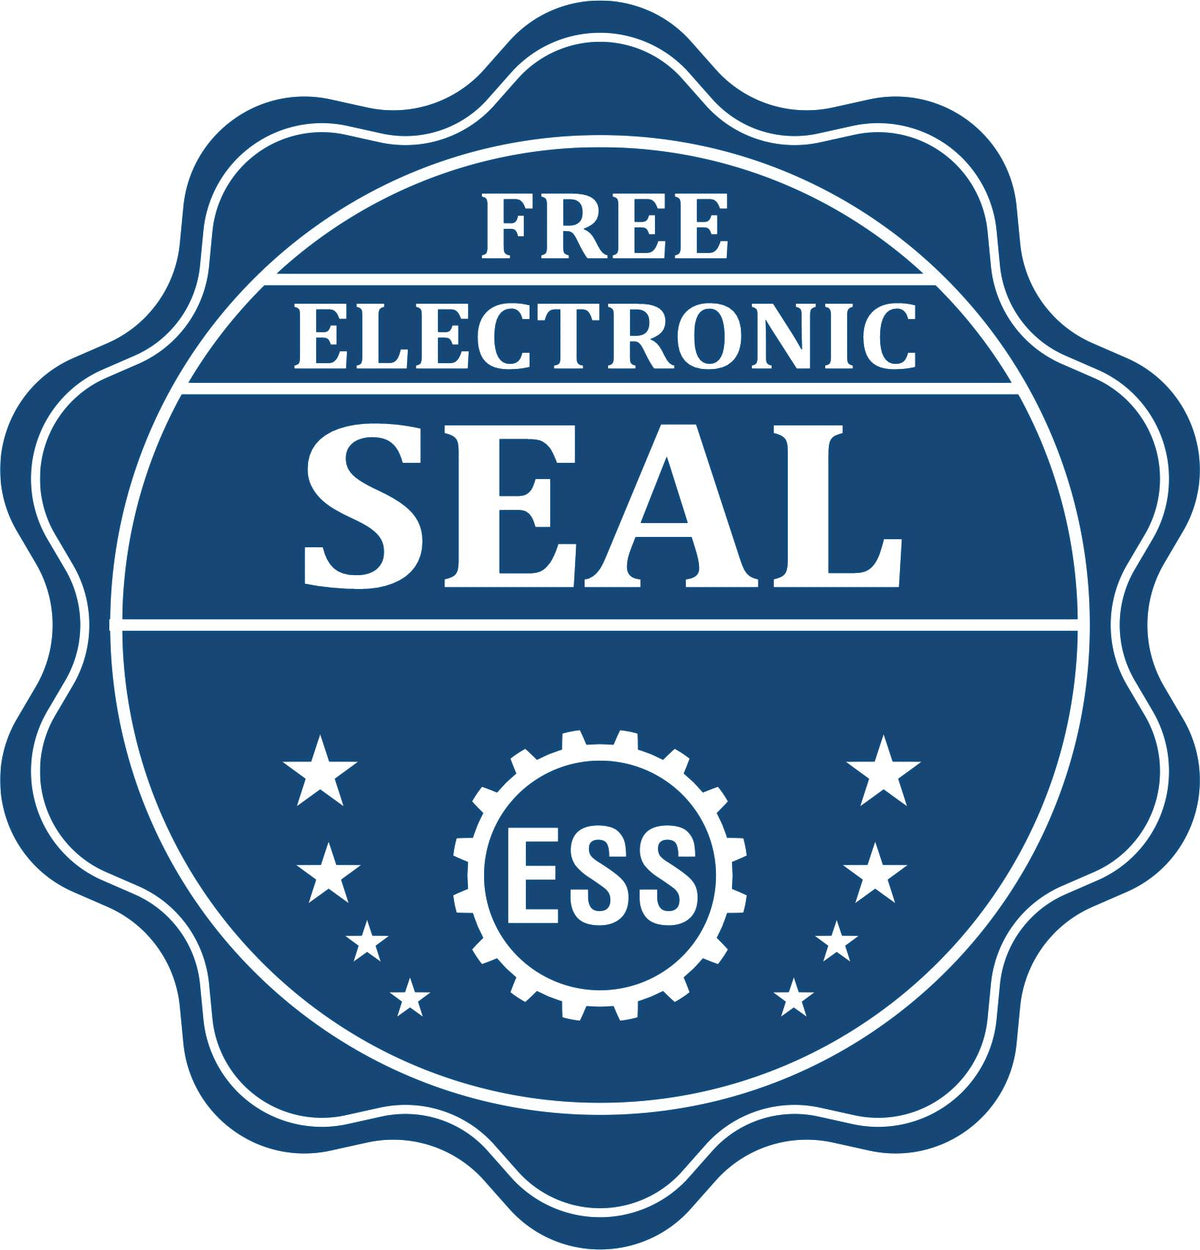 A badge showing a free electronic seal for the Gift Arizona Geologist Seal with stars and the ESS gear on the emblem.